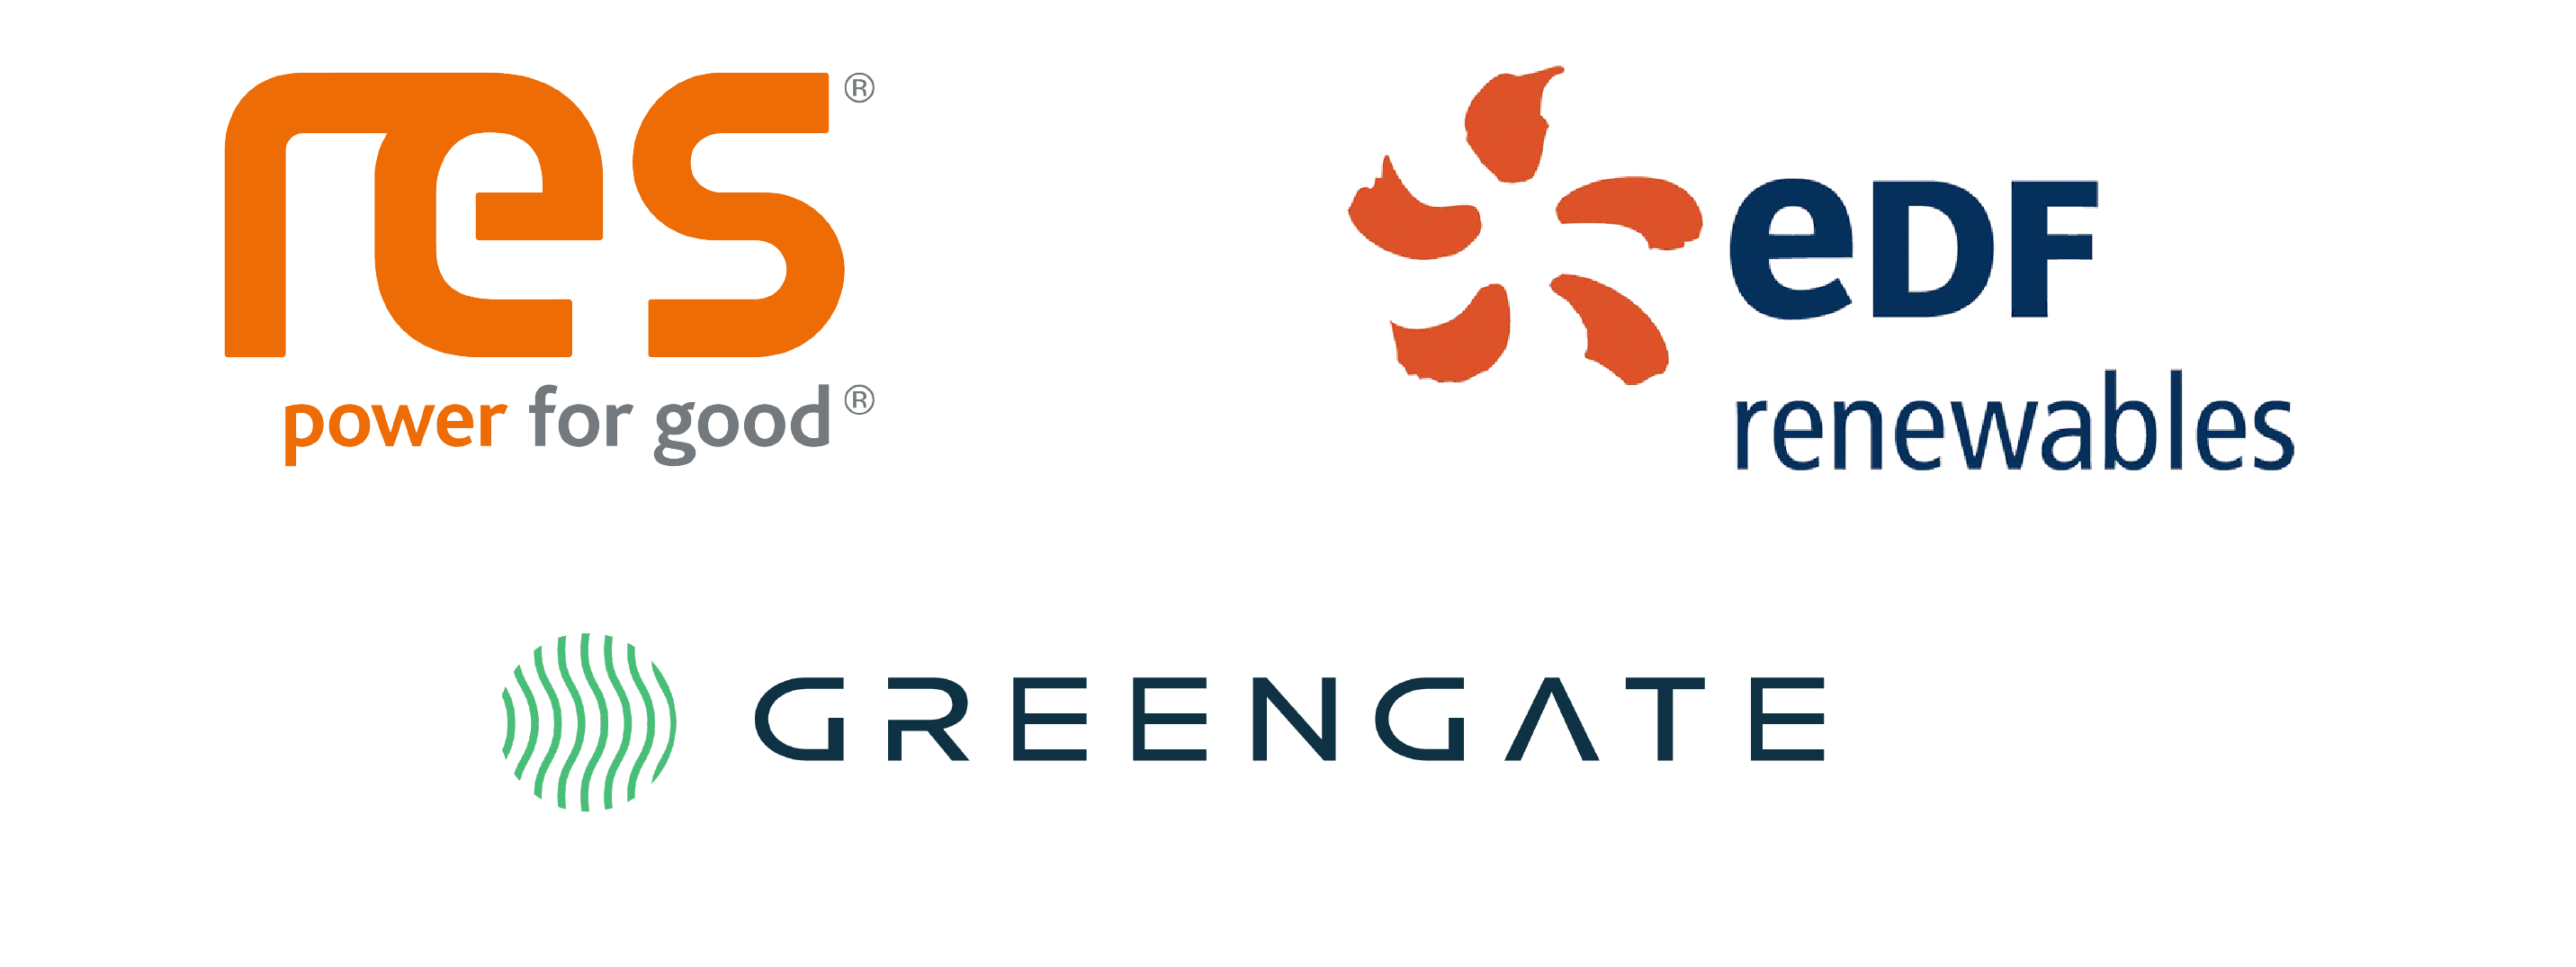 RES Canada, EDF, and Greengate logos